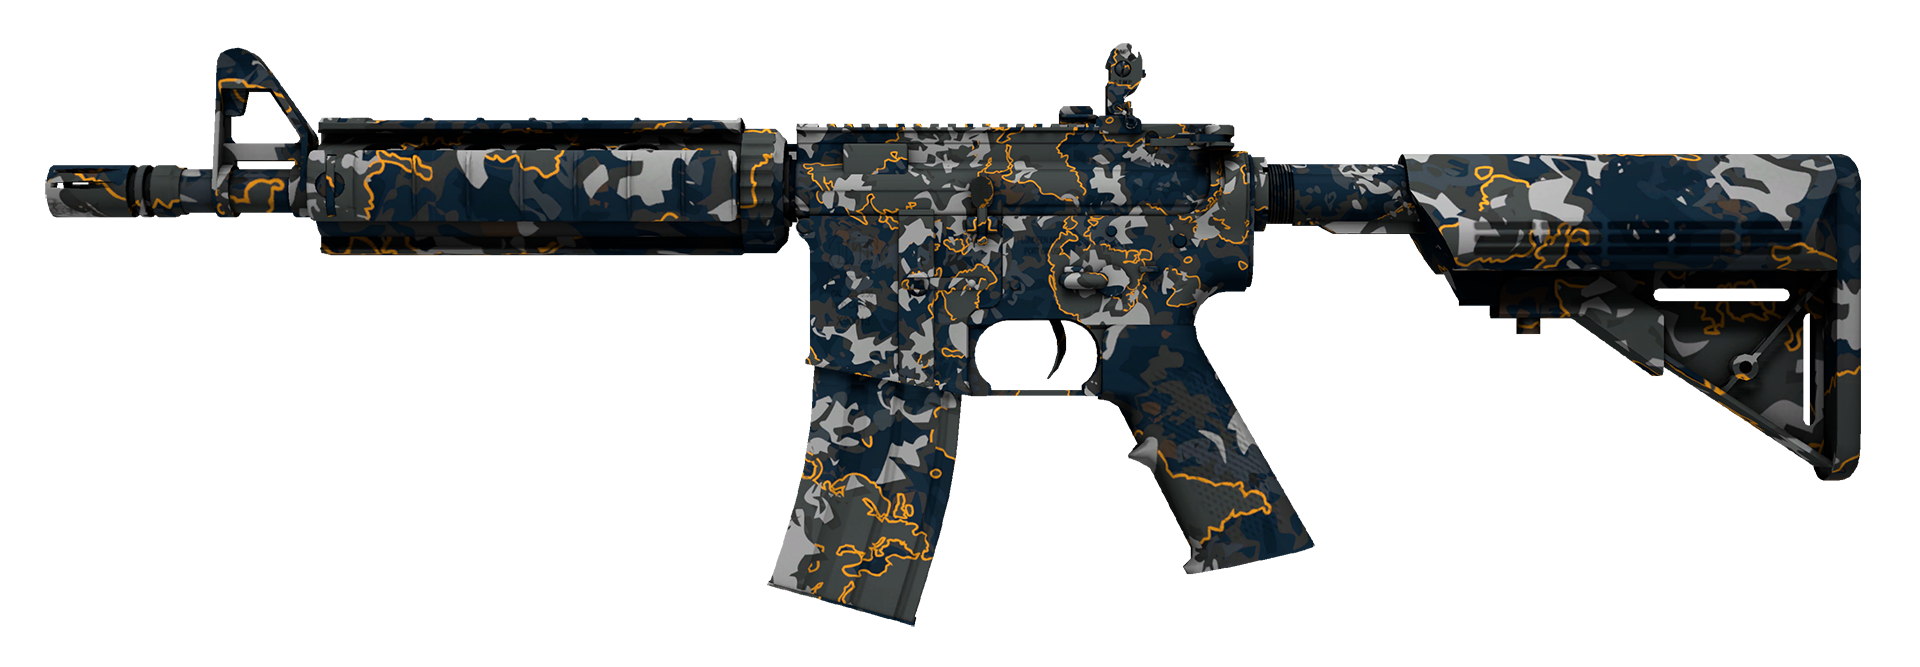 M4A4 Global Offensive Large Rendering